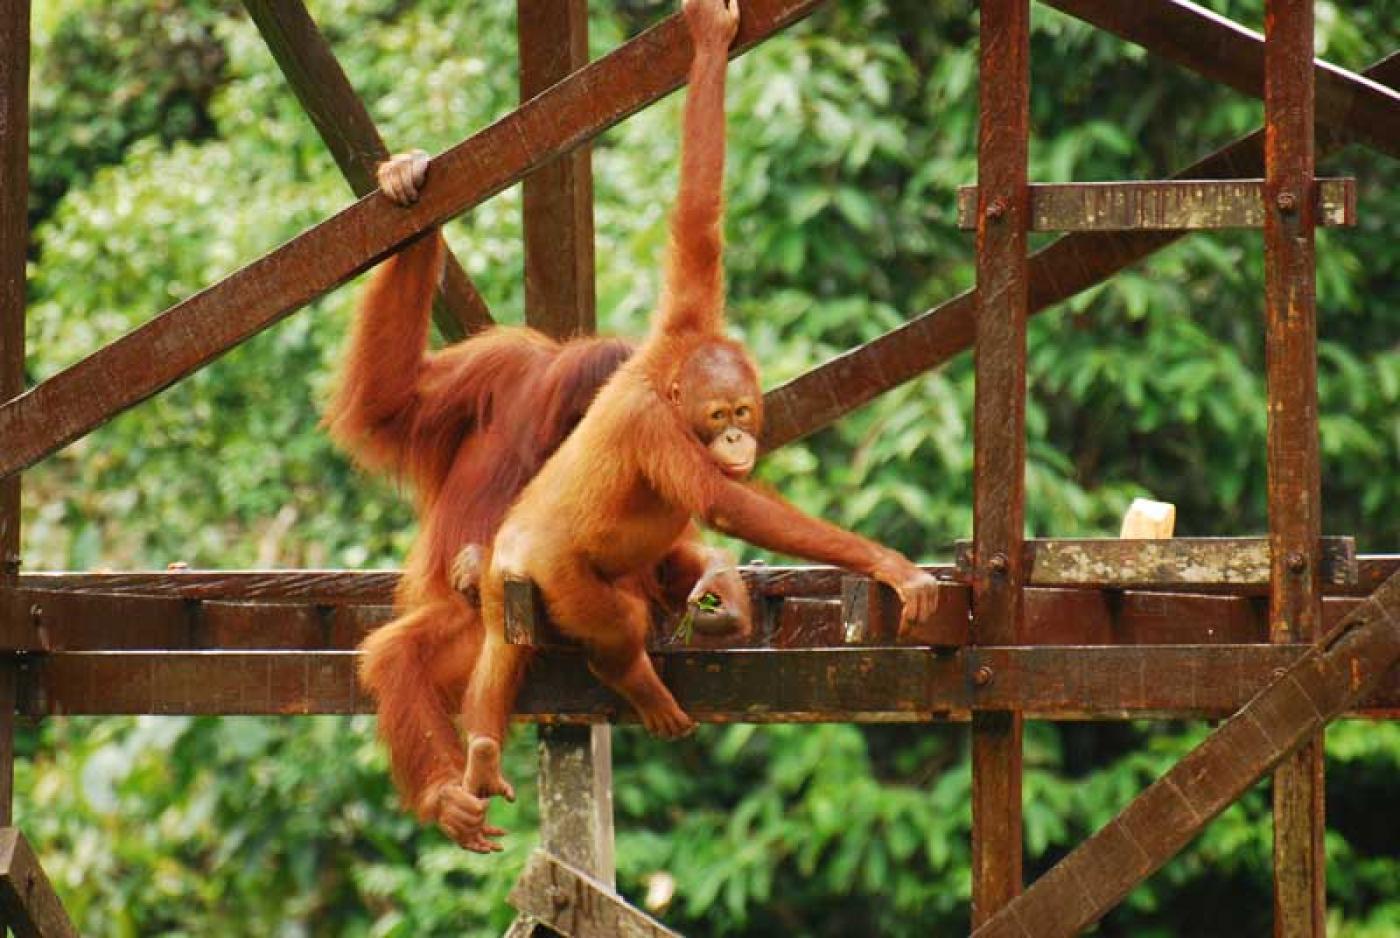 A day in the life of a volunteer at The Great Orangutan Project